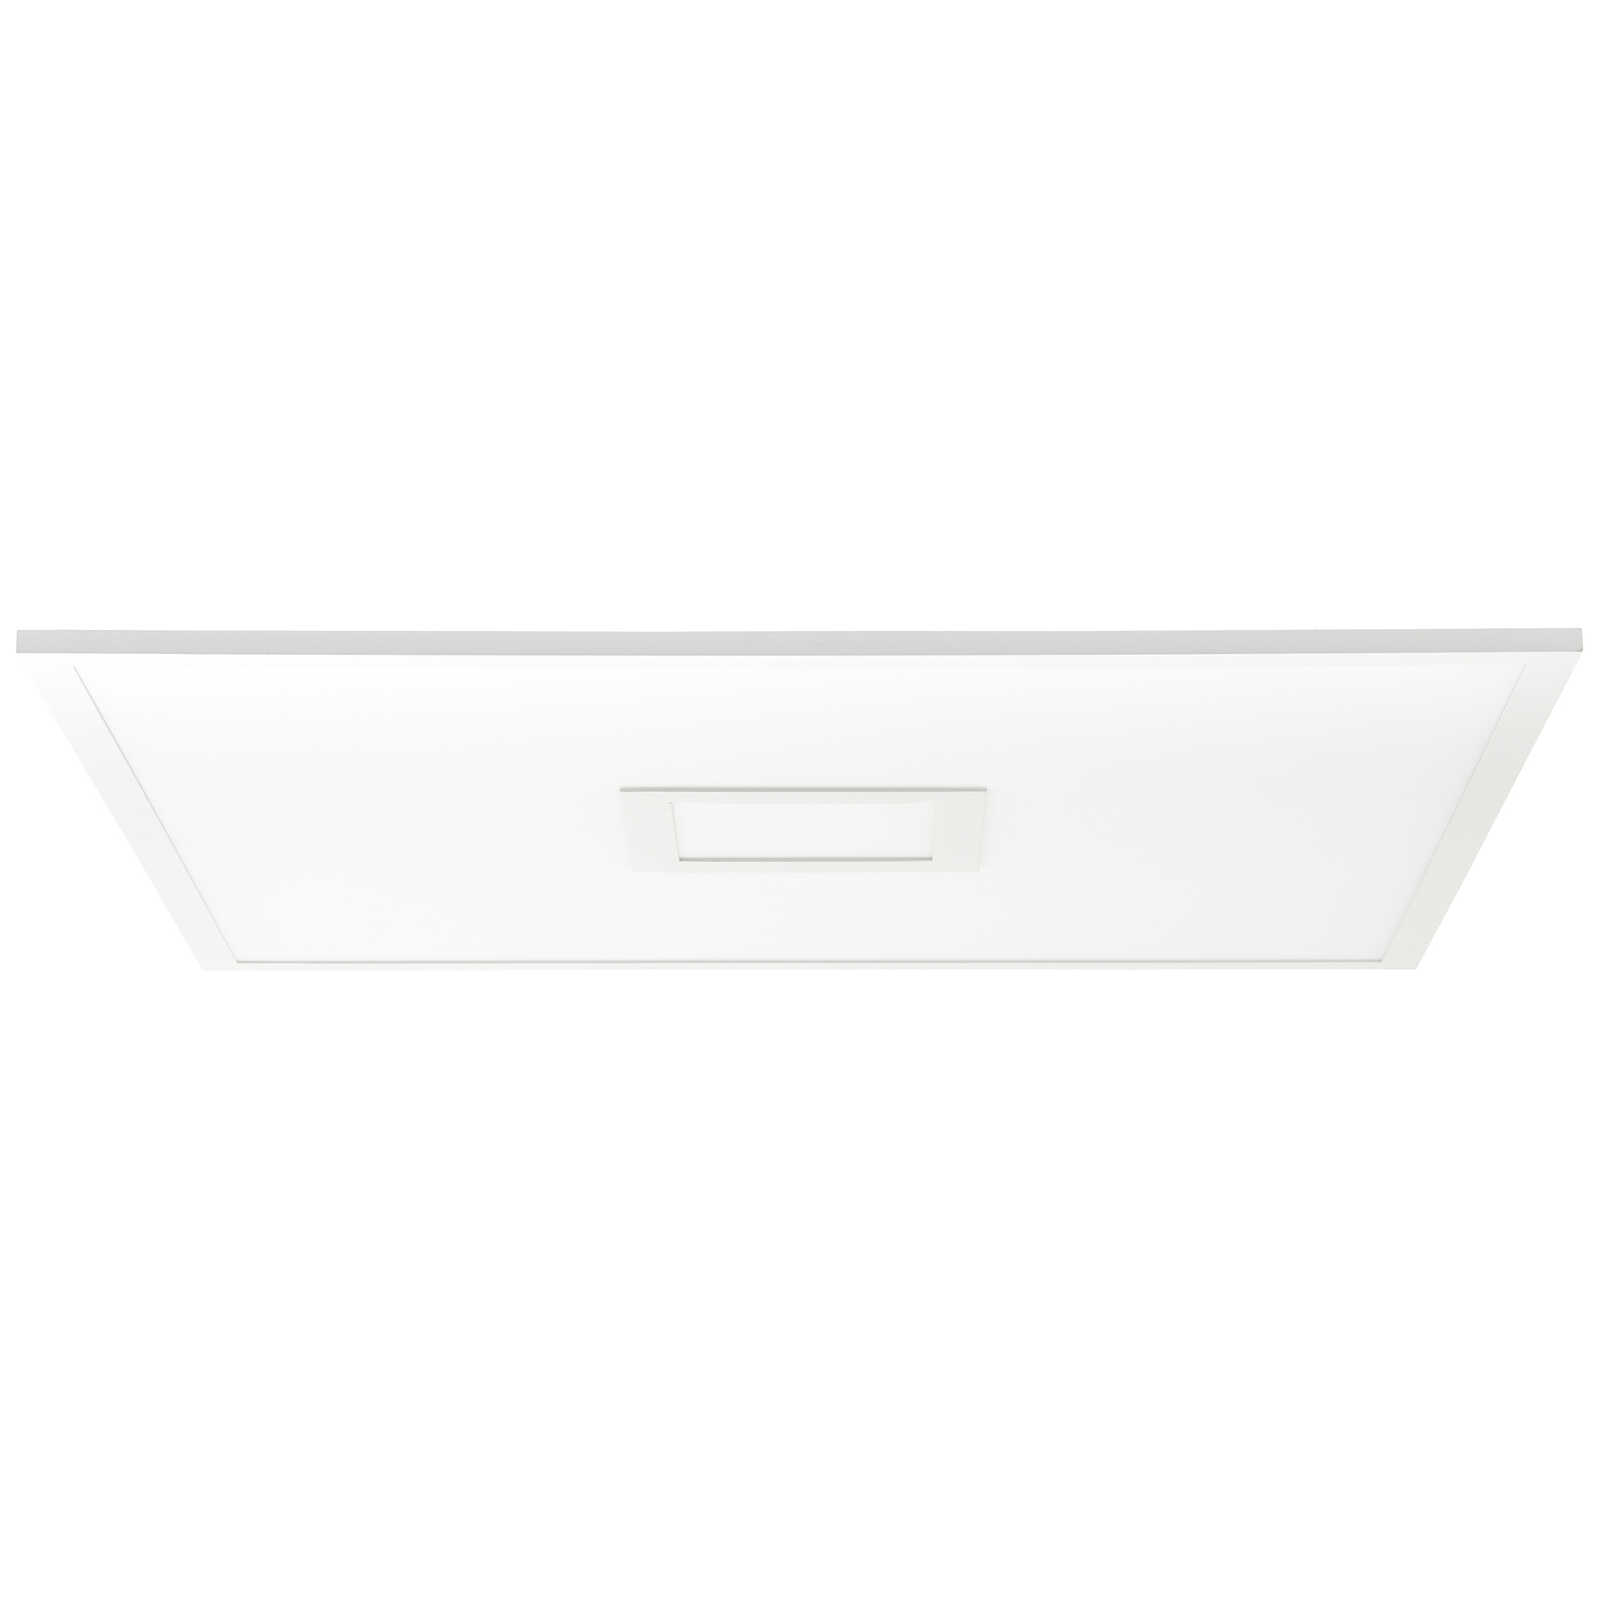             Metal ceiling light - Mads 2 - White
        